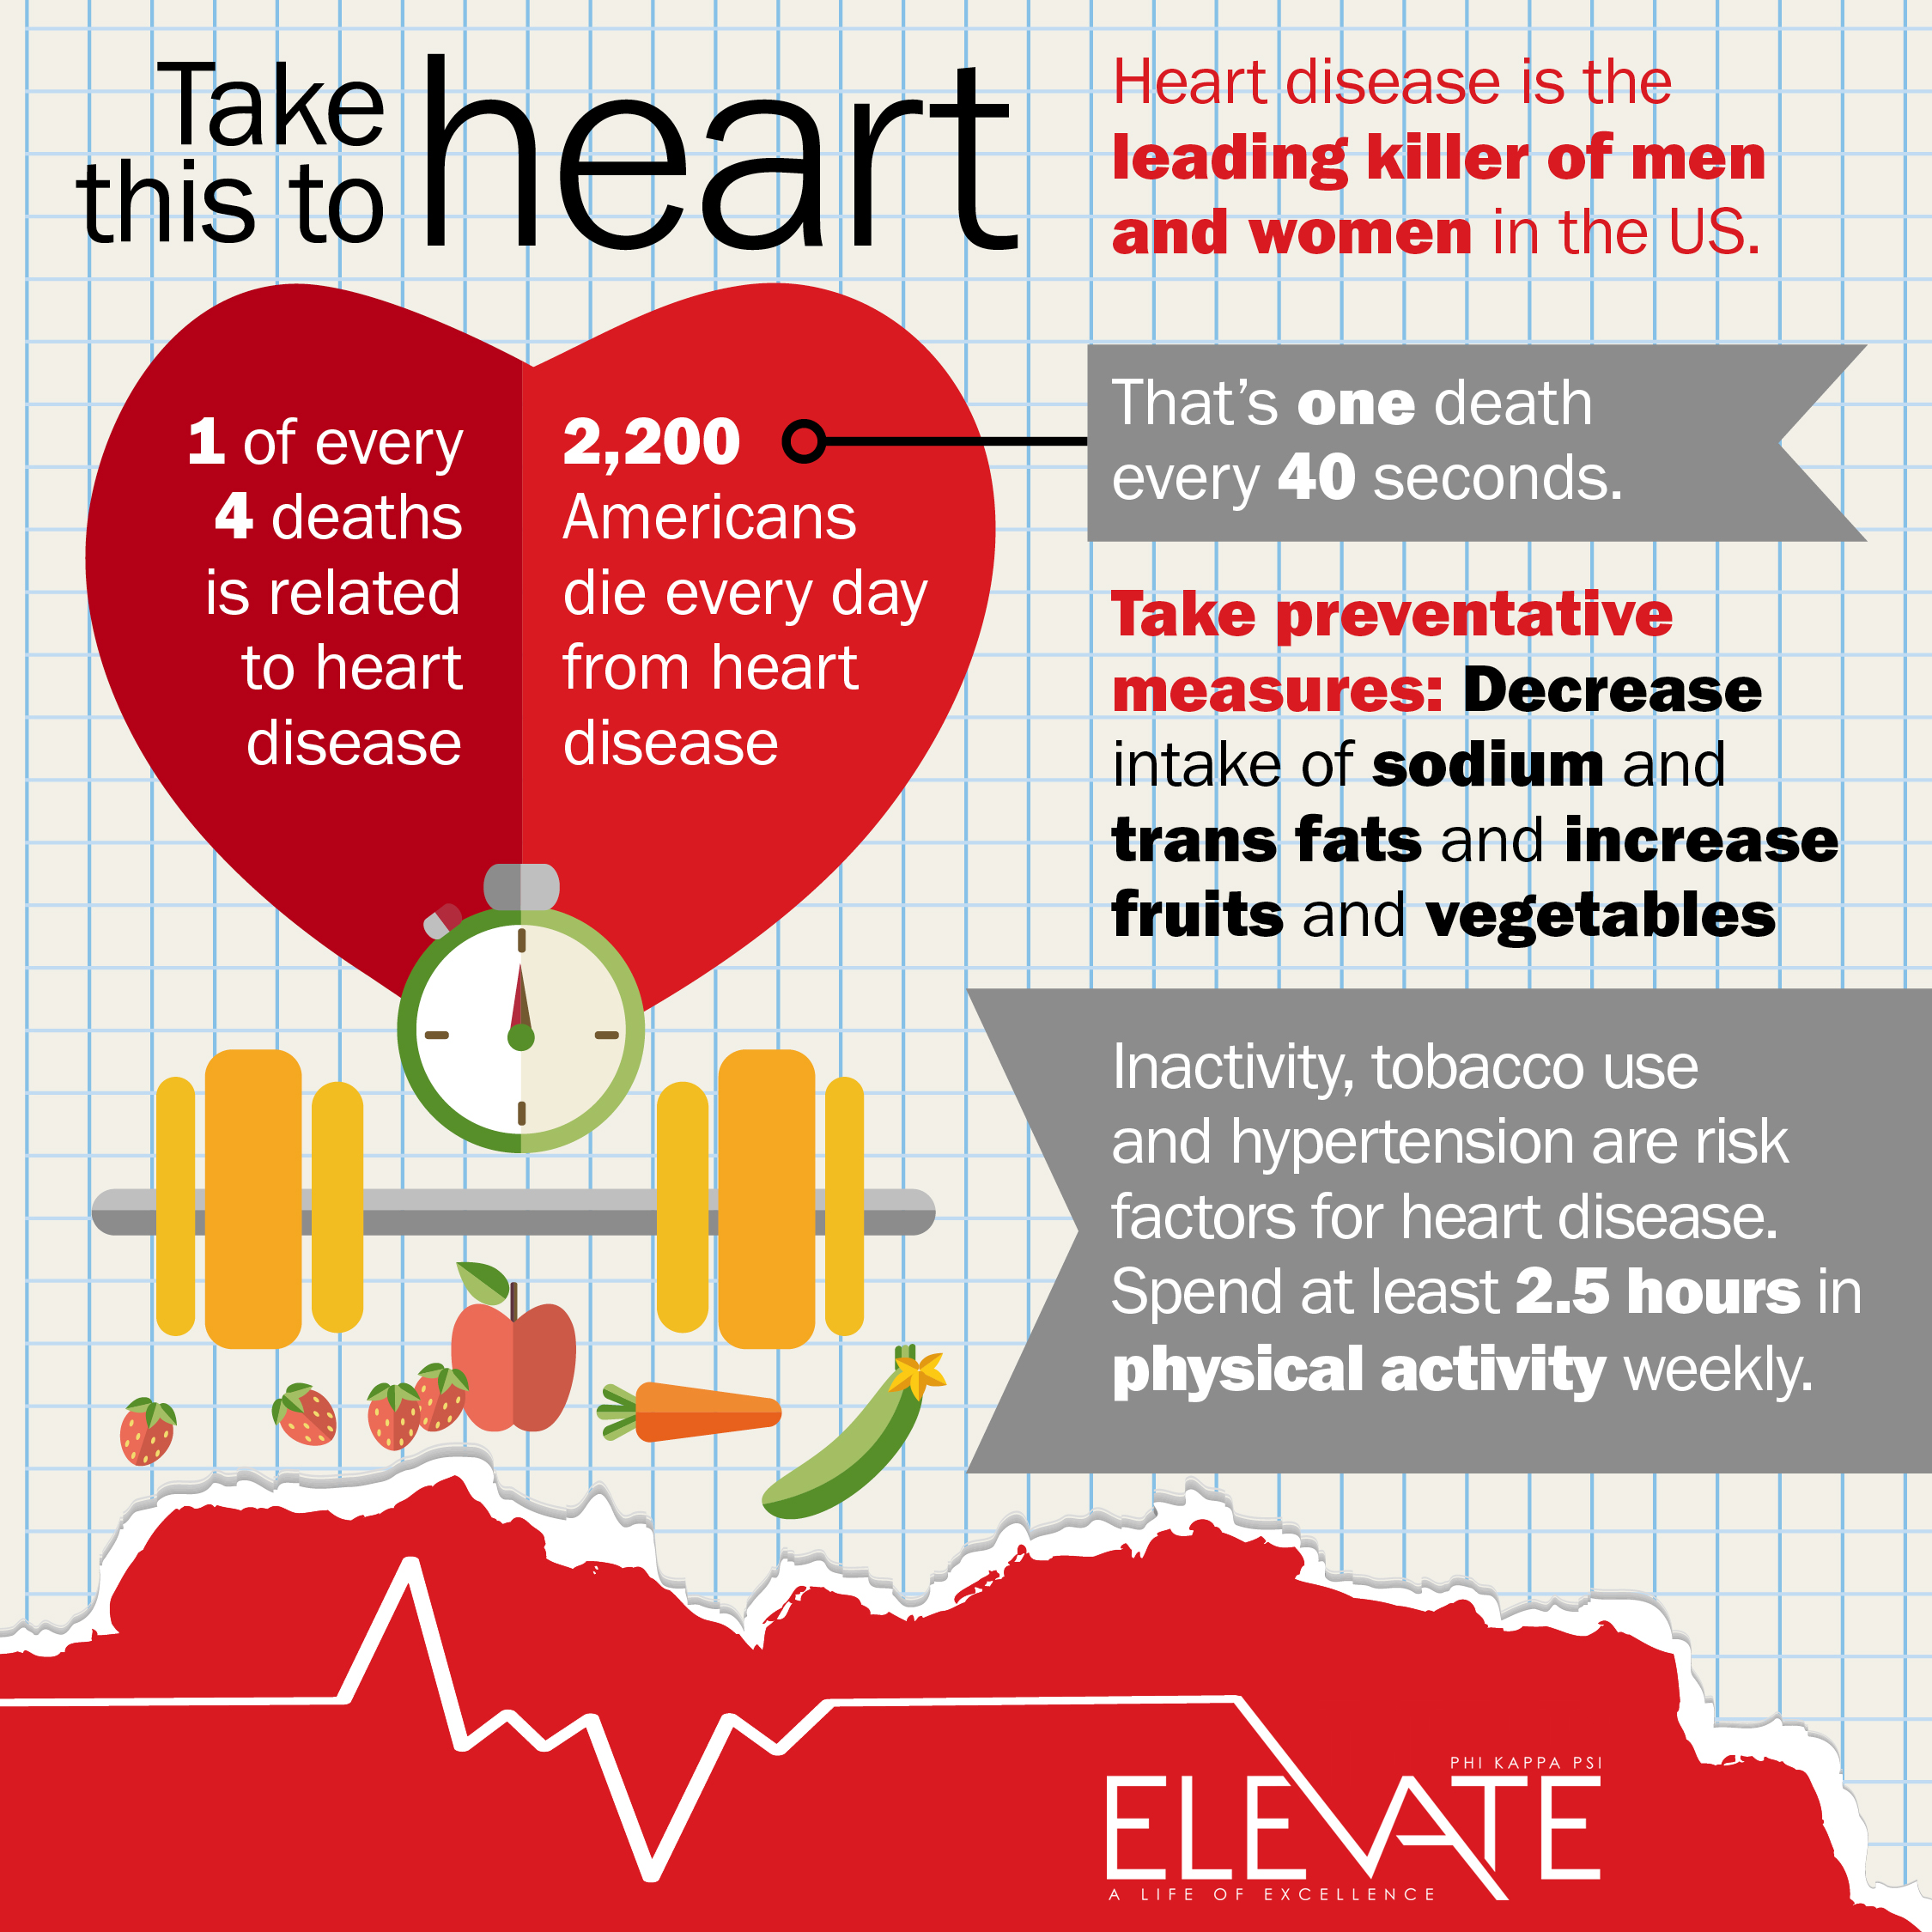 IG_heart health_infographic_1_2018 ELEVATE Phi Kappa Psi Fraternity